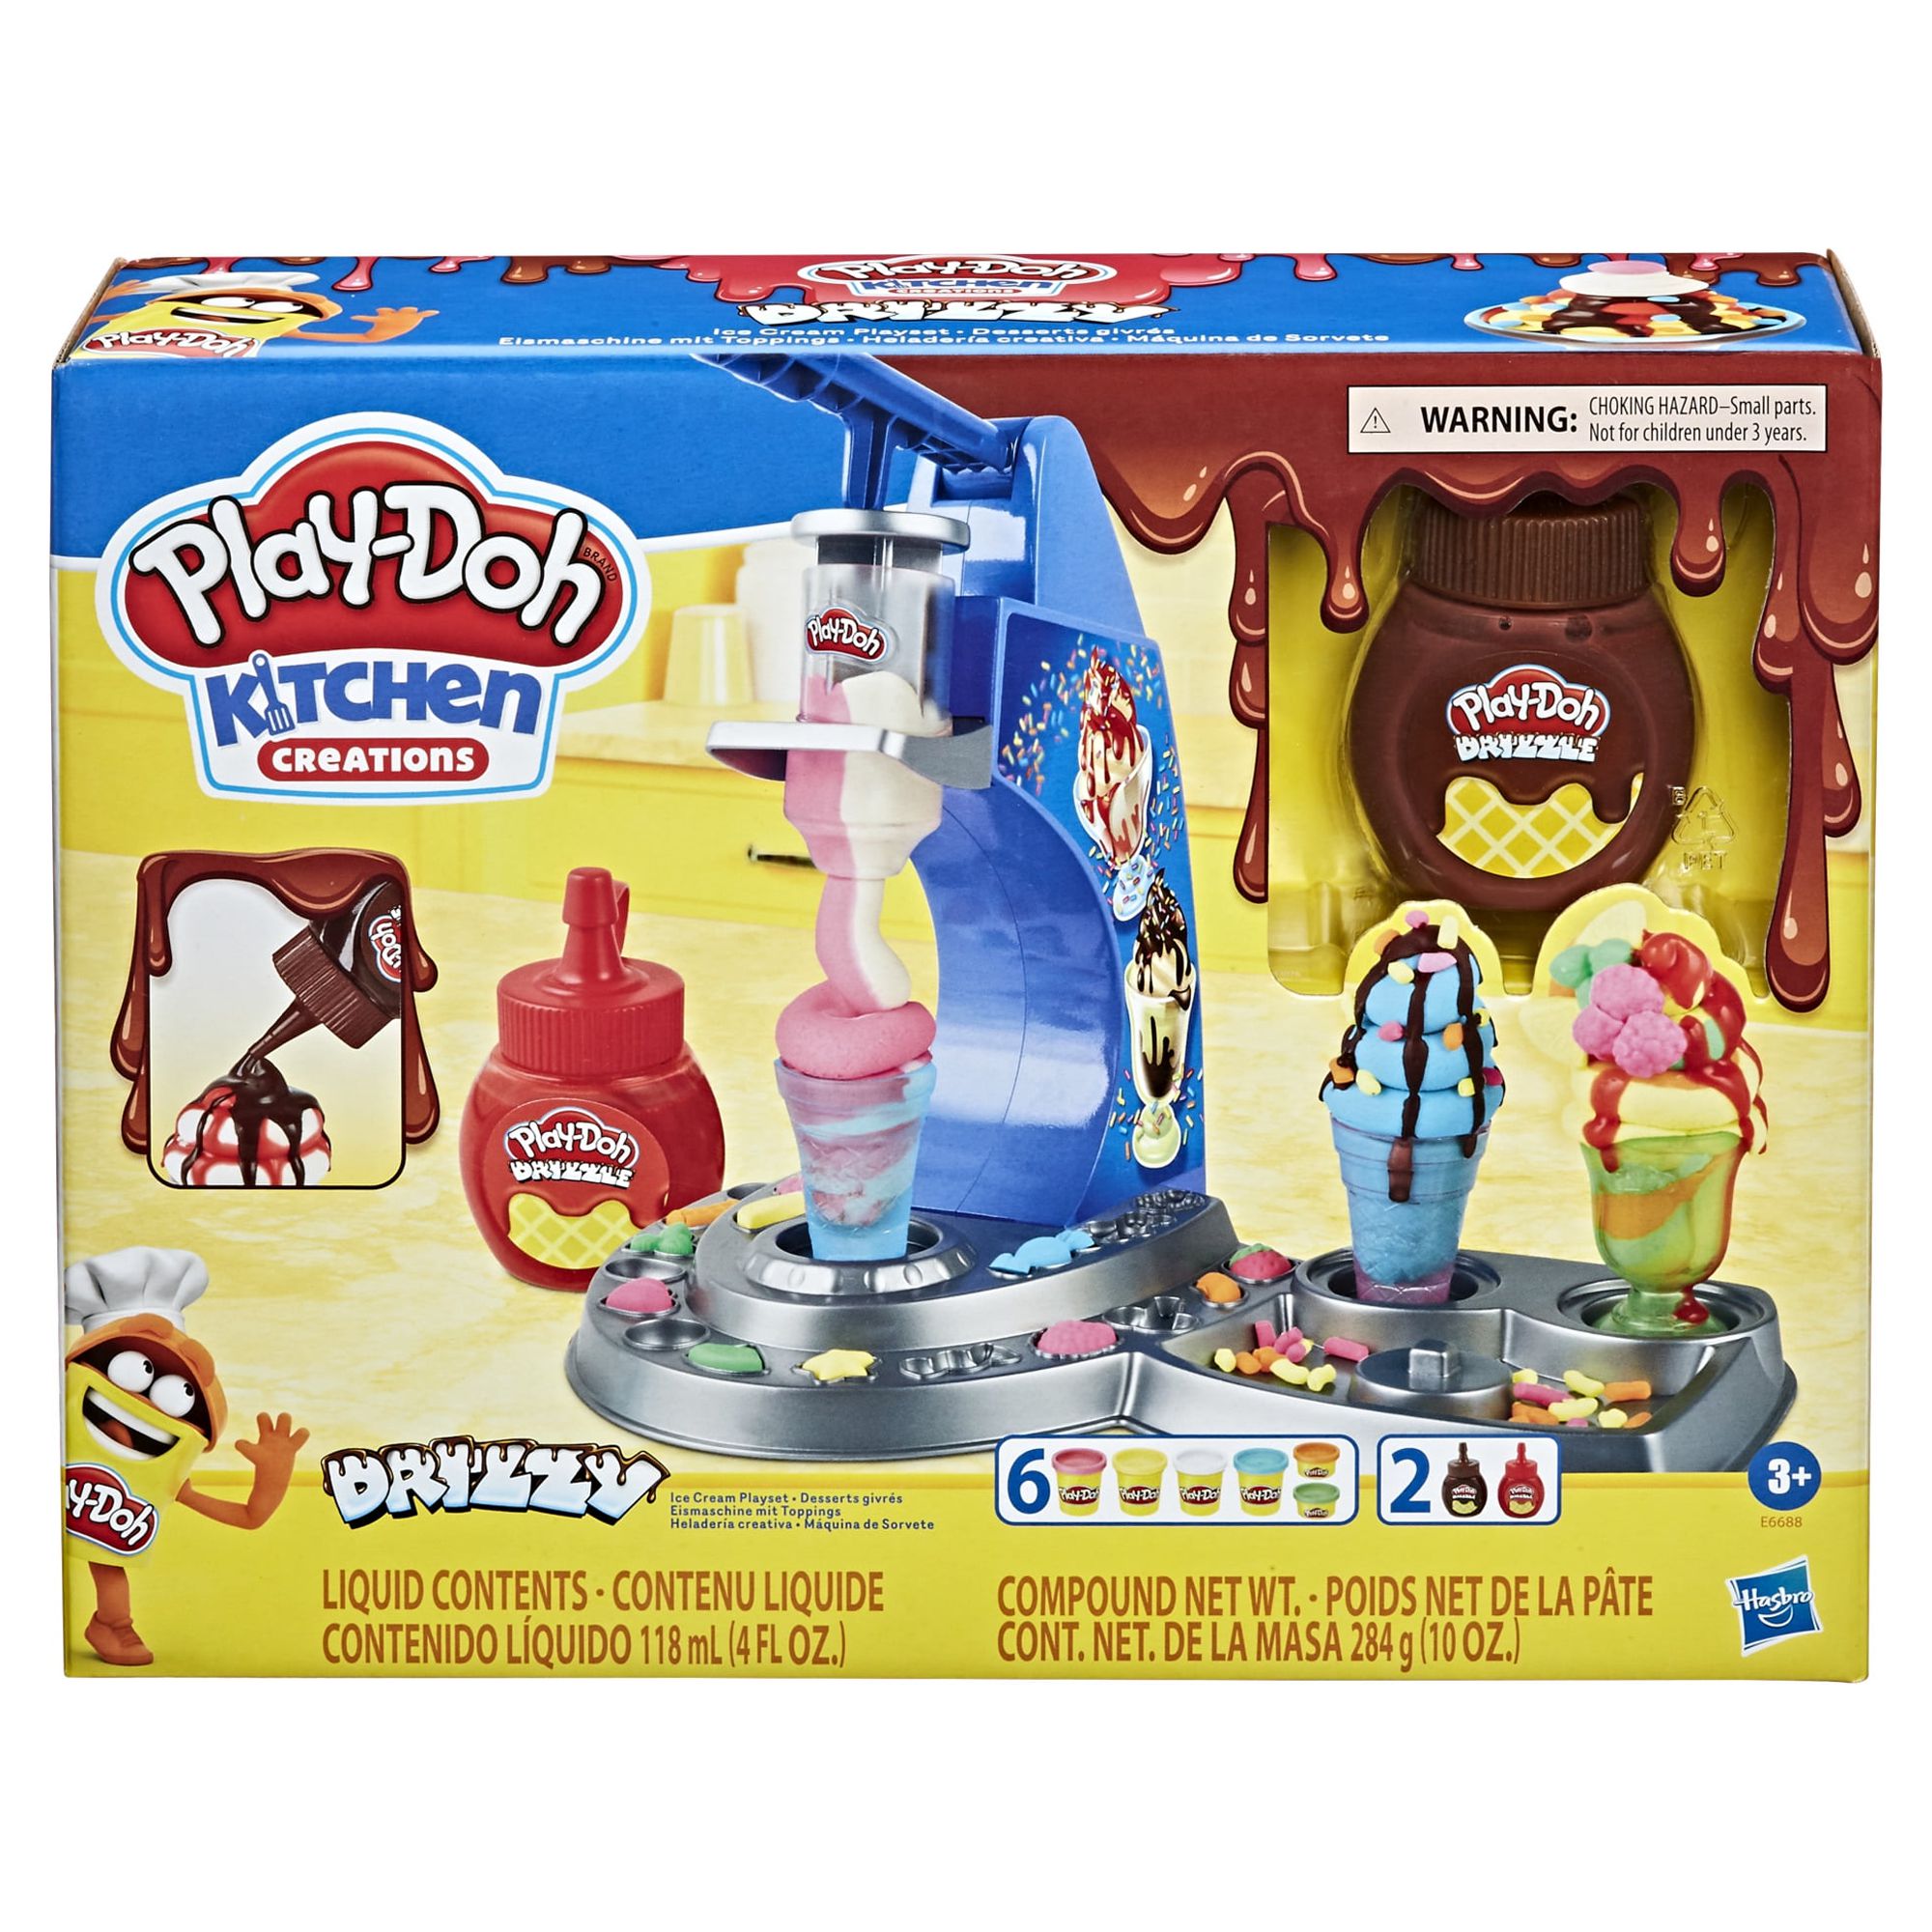 Play-Doh Kitchen Creations Drizzy Ice Cream Play Dough Set - 6 Color (6 Piece) - image 1 of 12